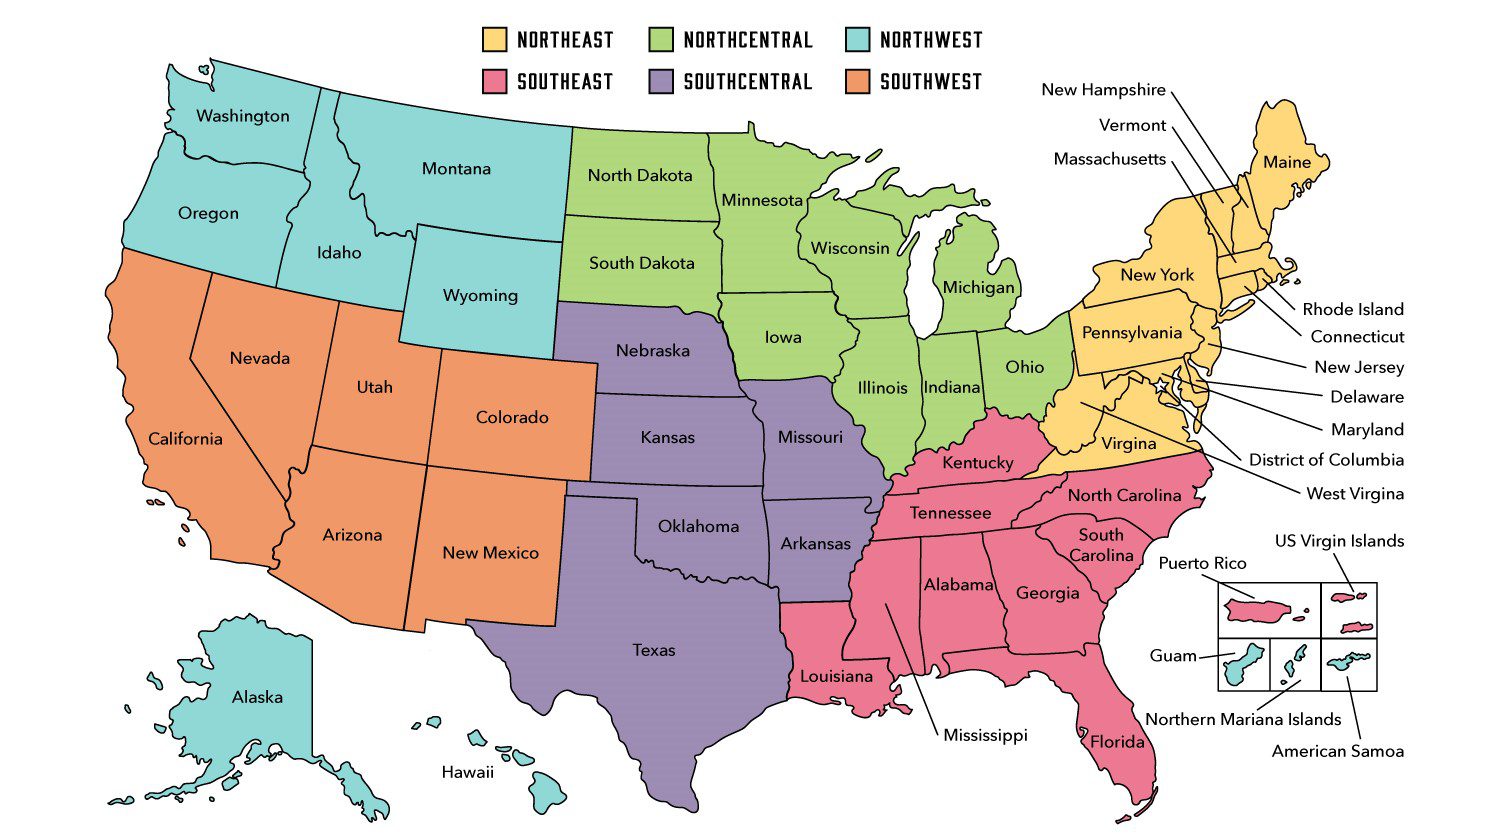 Map of the United States and Territories highlighting the six APH Outreach regions: Northeast, Northcentral, Northwest, Southeast, Southcentral, and Southwest.